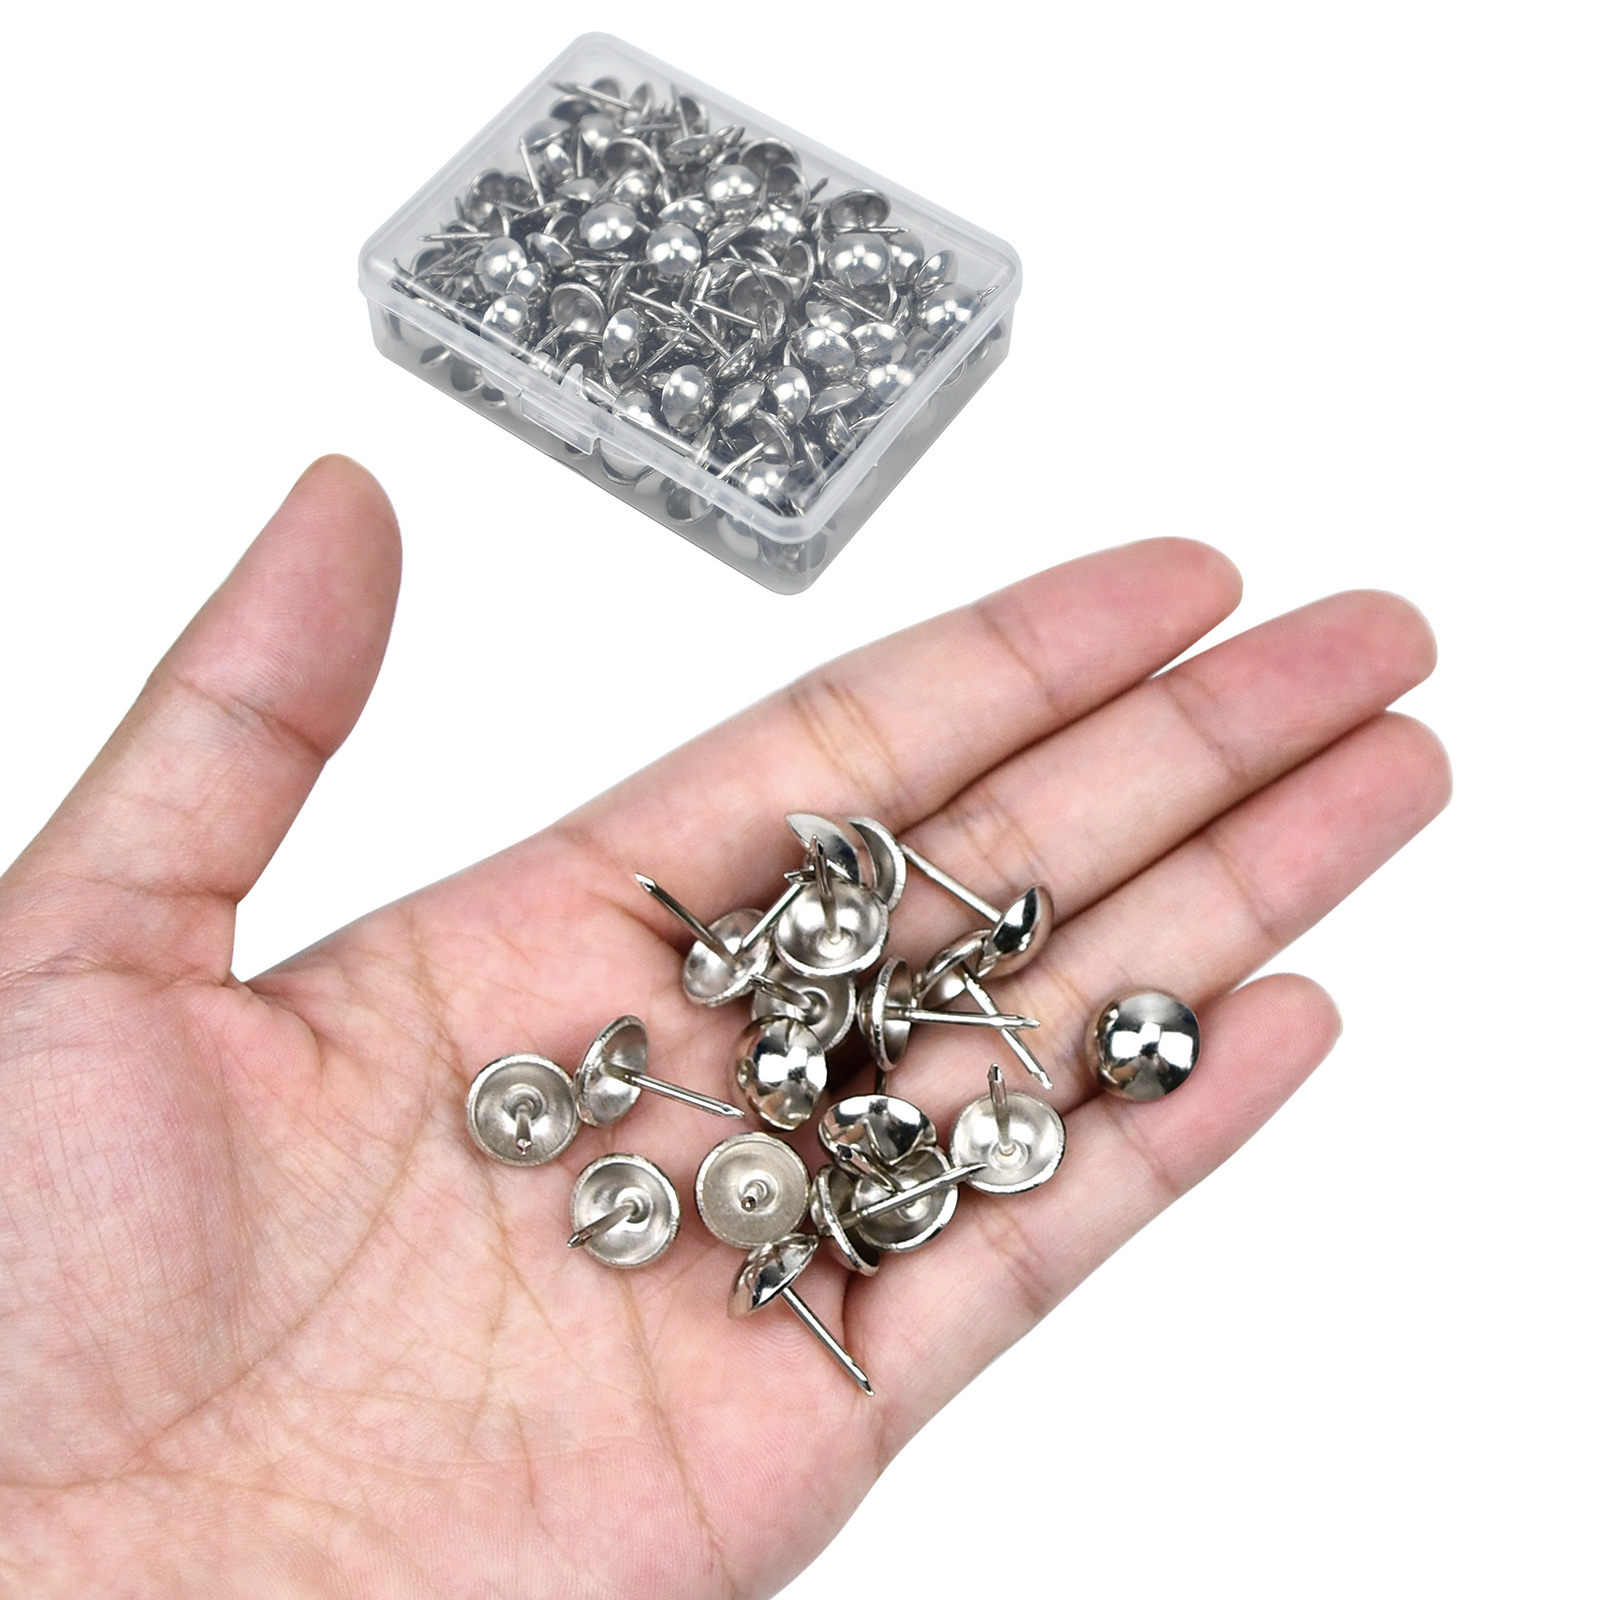 60PCS Upholstery Tacks - Bed Skirt Pins or Holders Clear Head